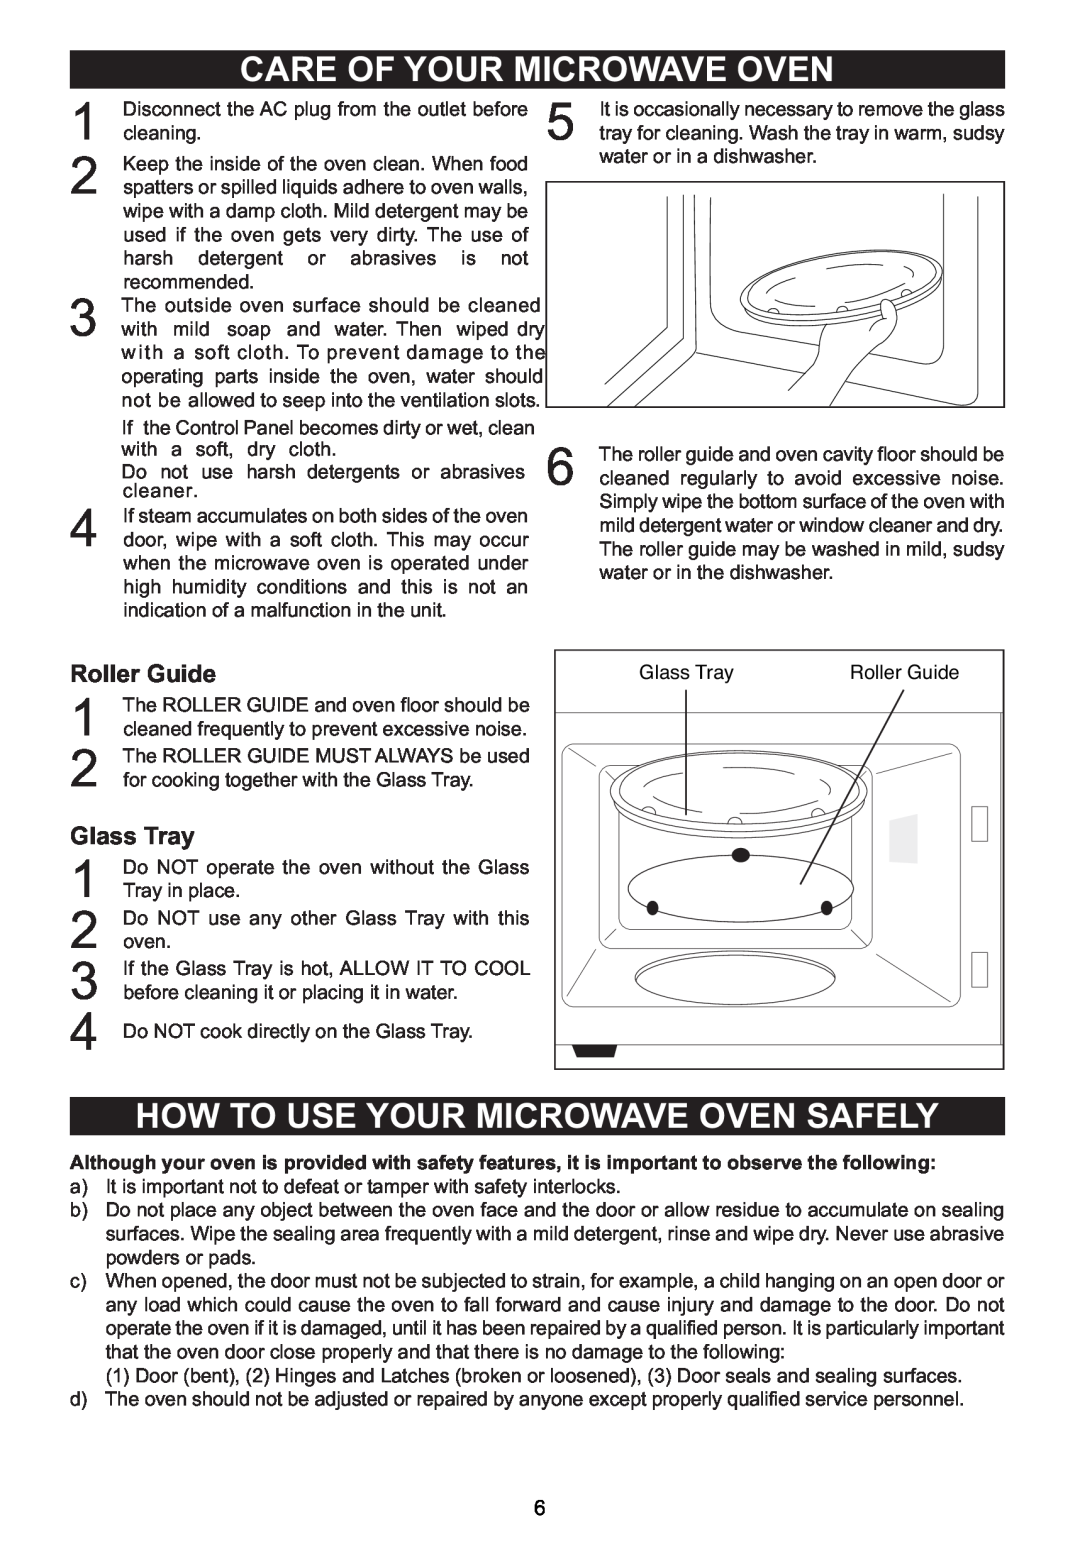 Emerson MW1161SB owner manual Care Of Your Microwave Oven, How To Use Your Microwave Oven Safely, Roller Guide, Glass Tray 